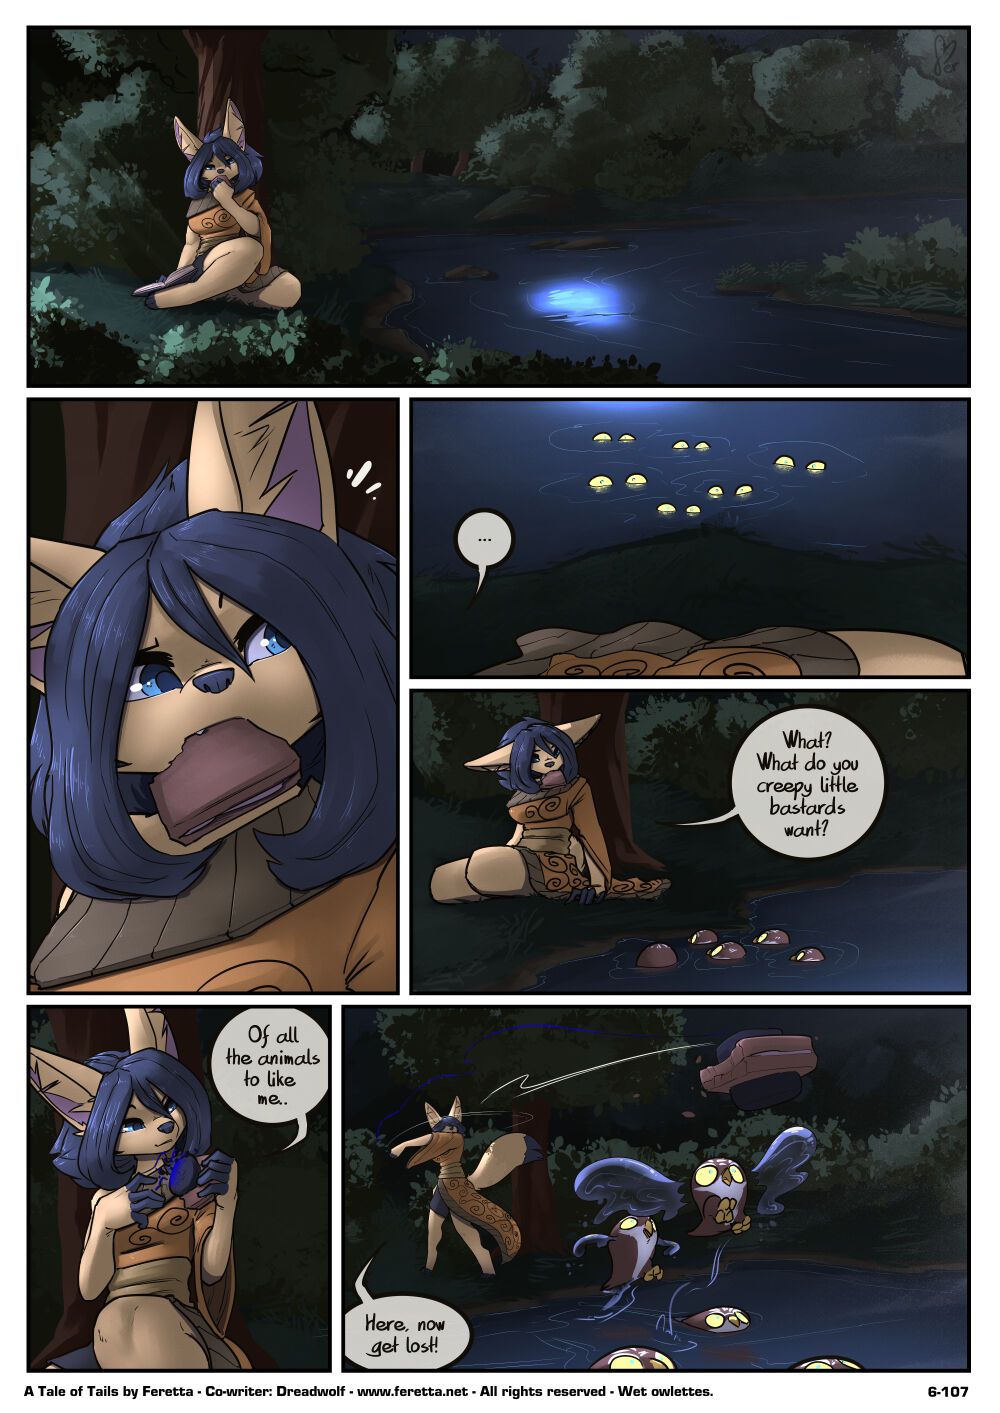 [Feretta] A Tale of Tails: Chapter 6 - Paths converge (ongoing) 110